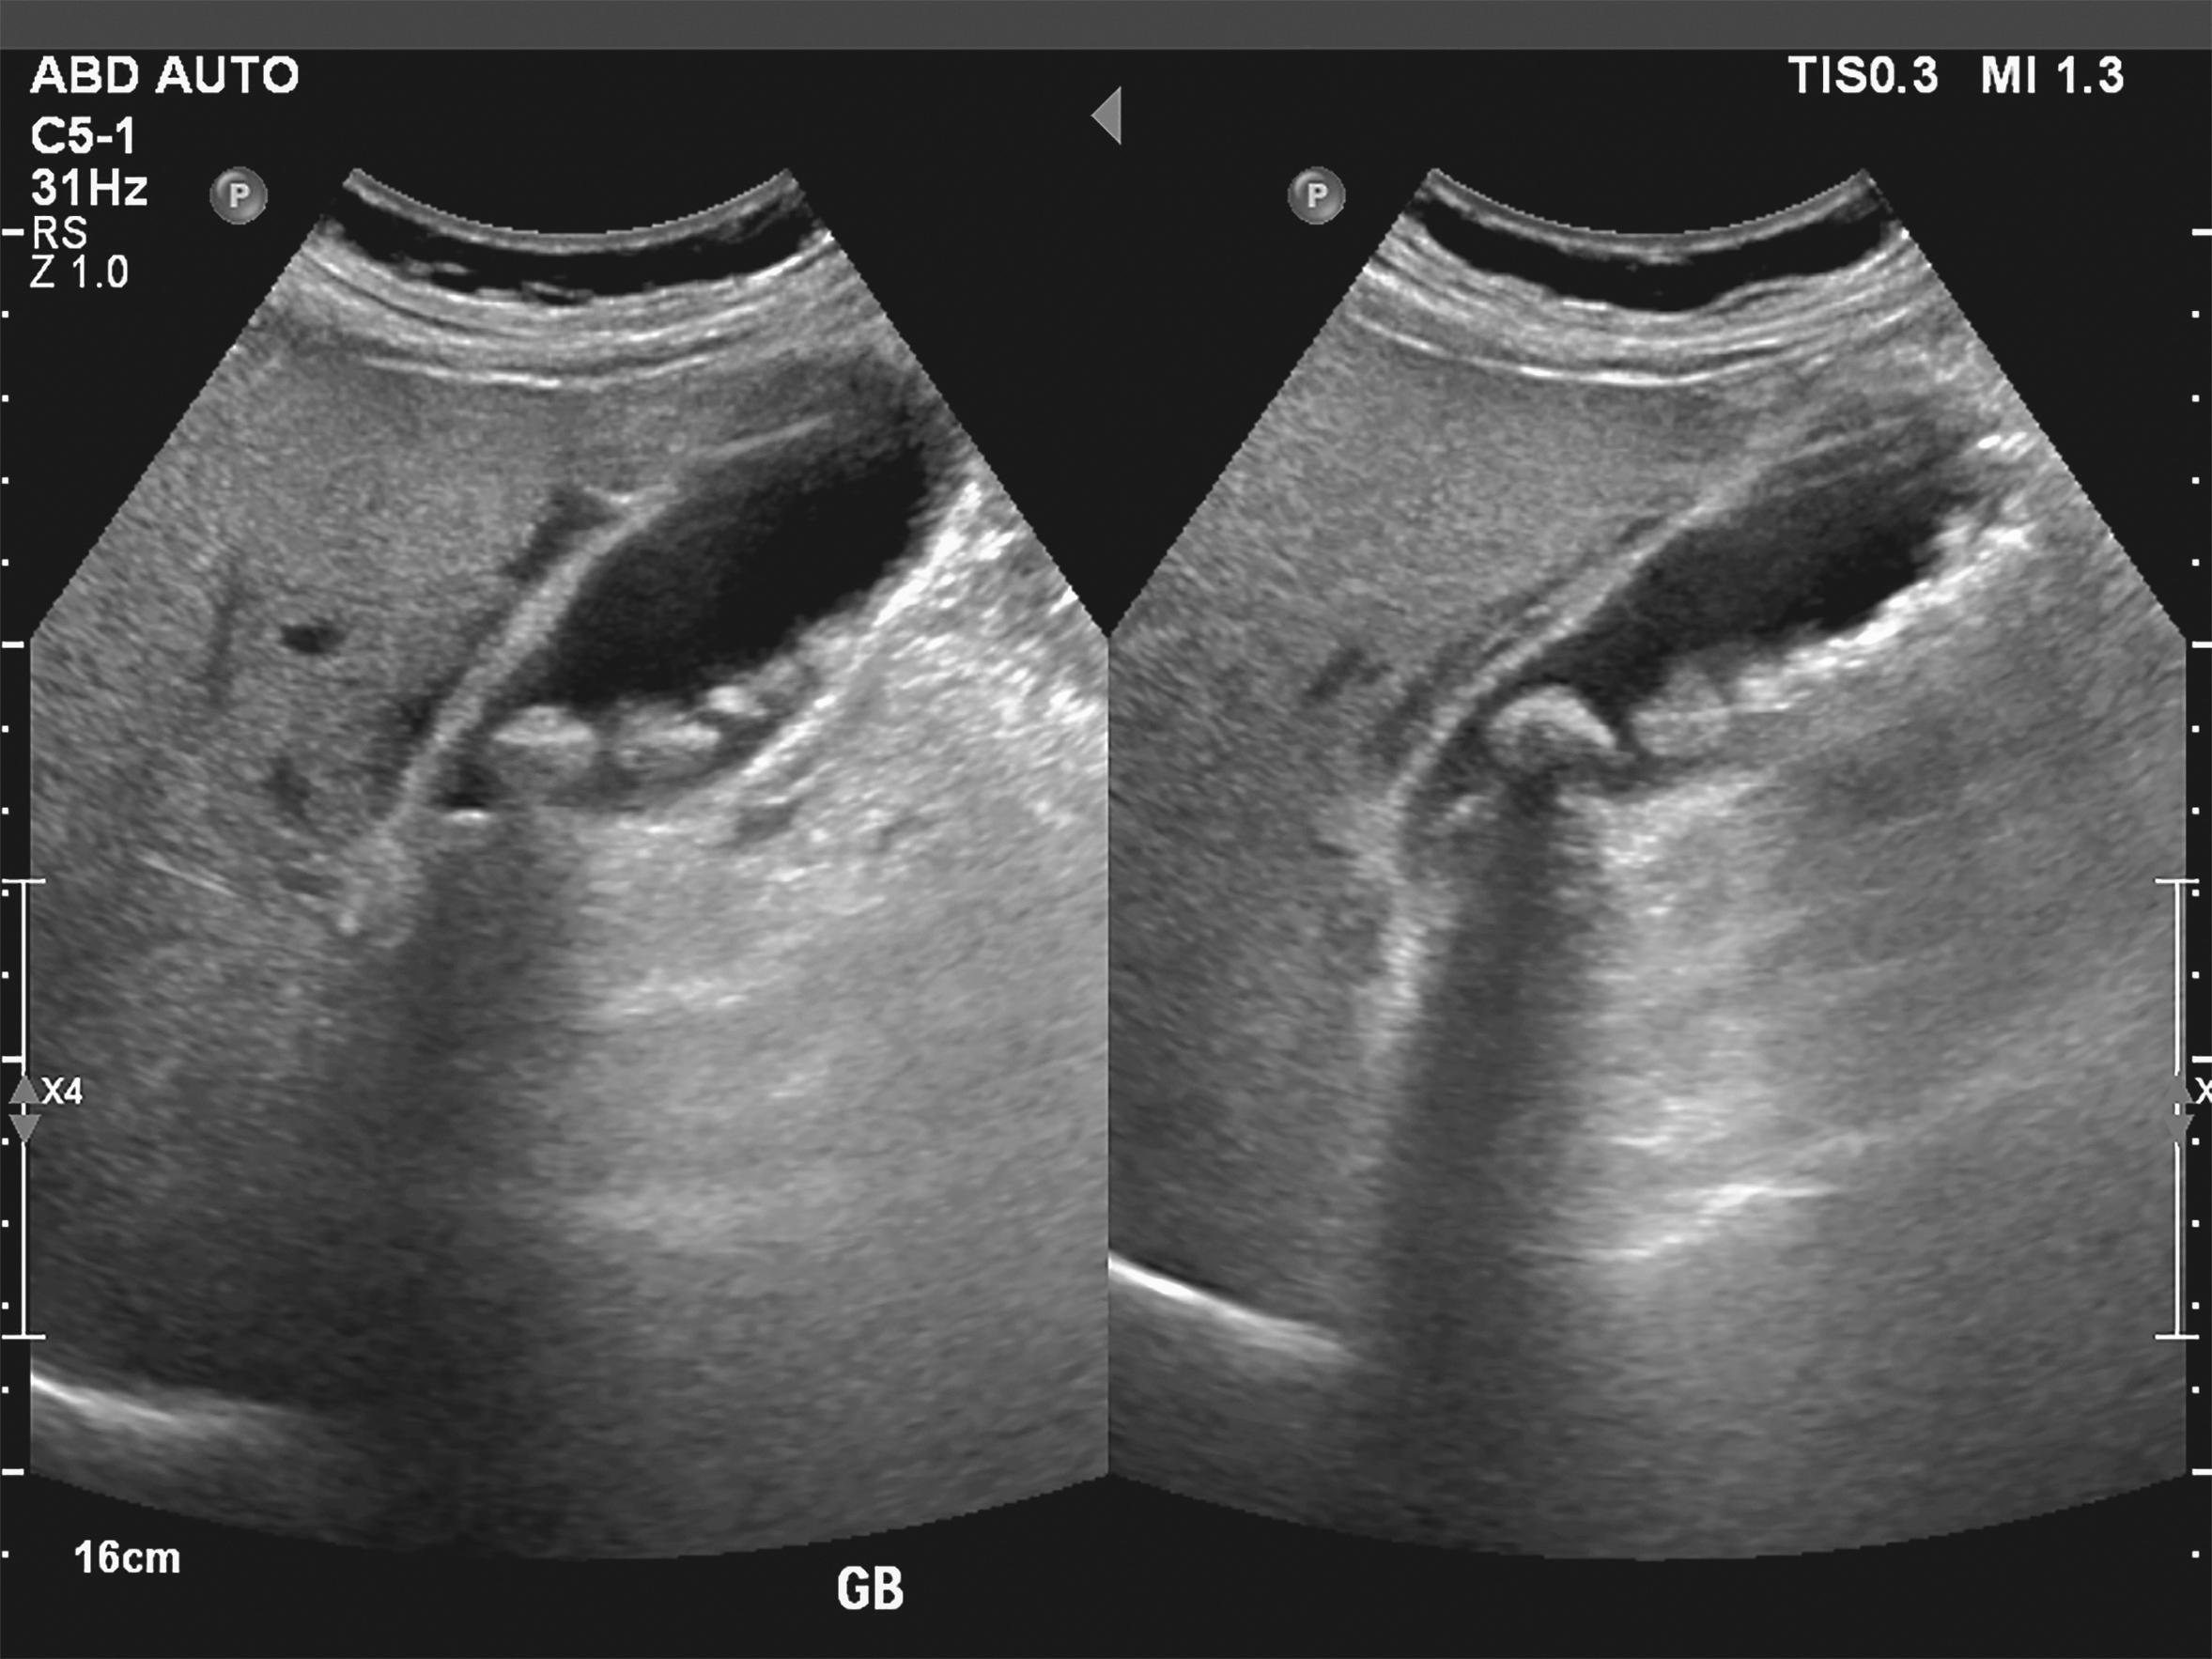 ultrasonography image of gallbladder with gall stones at upper abdomen